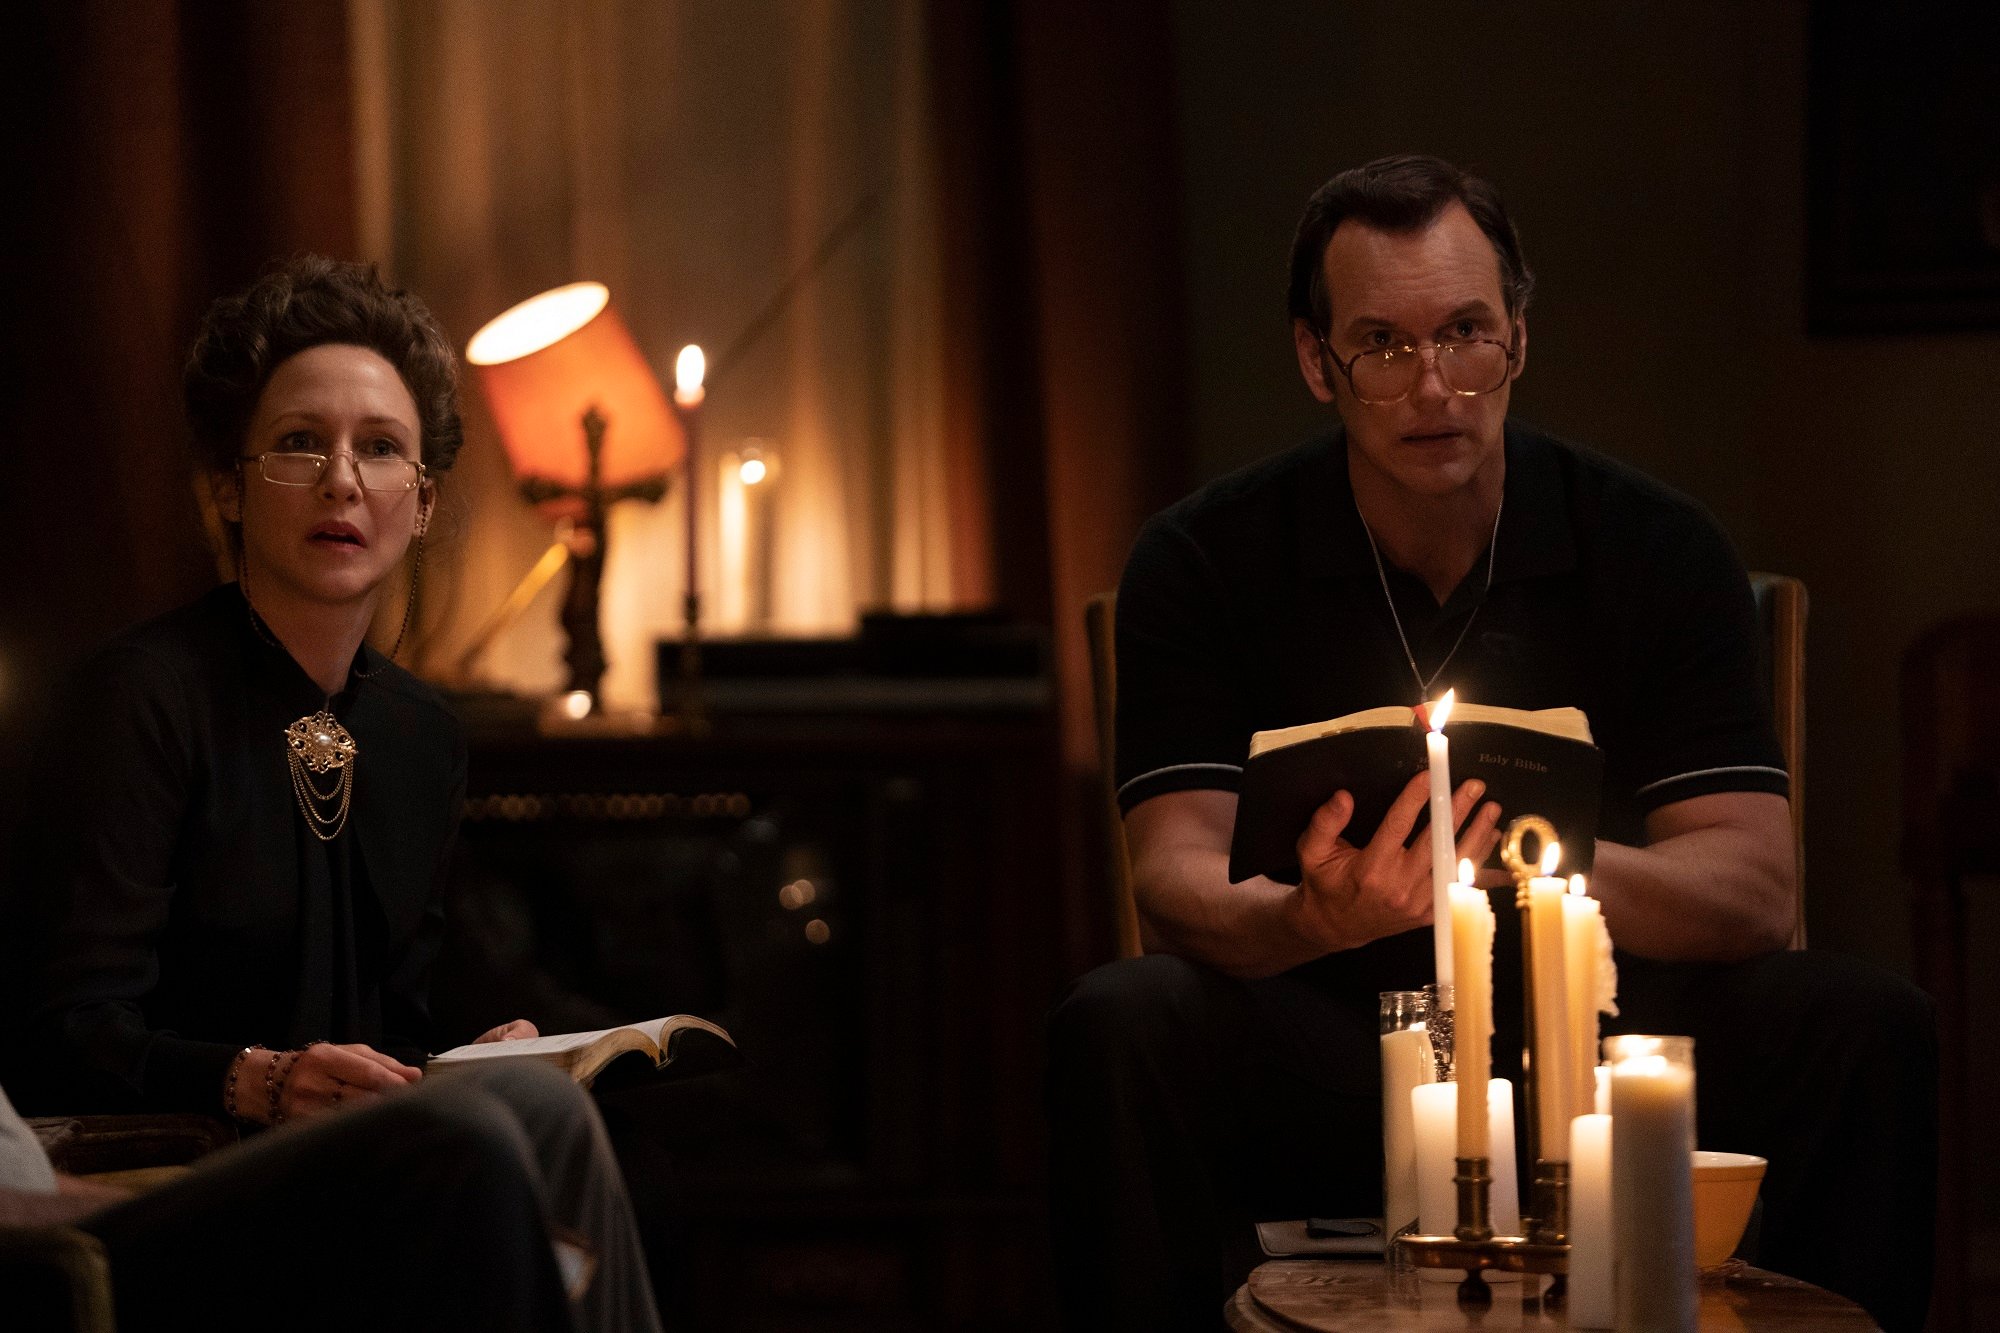 Ed and Lorraine Warren pray by candlelight